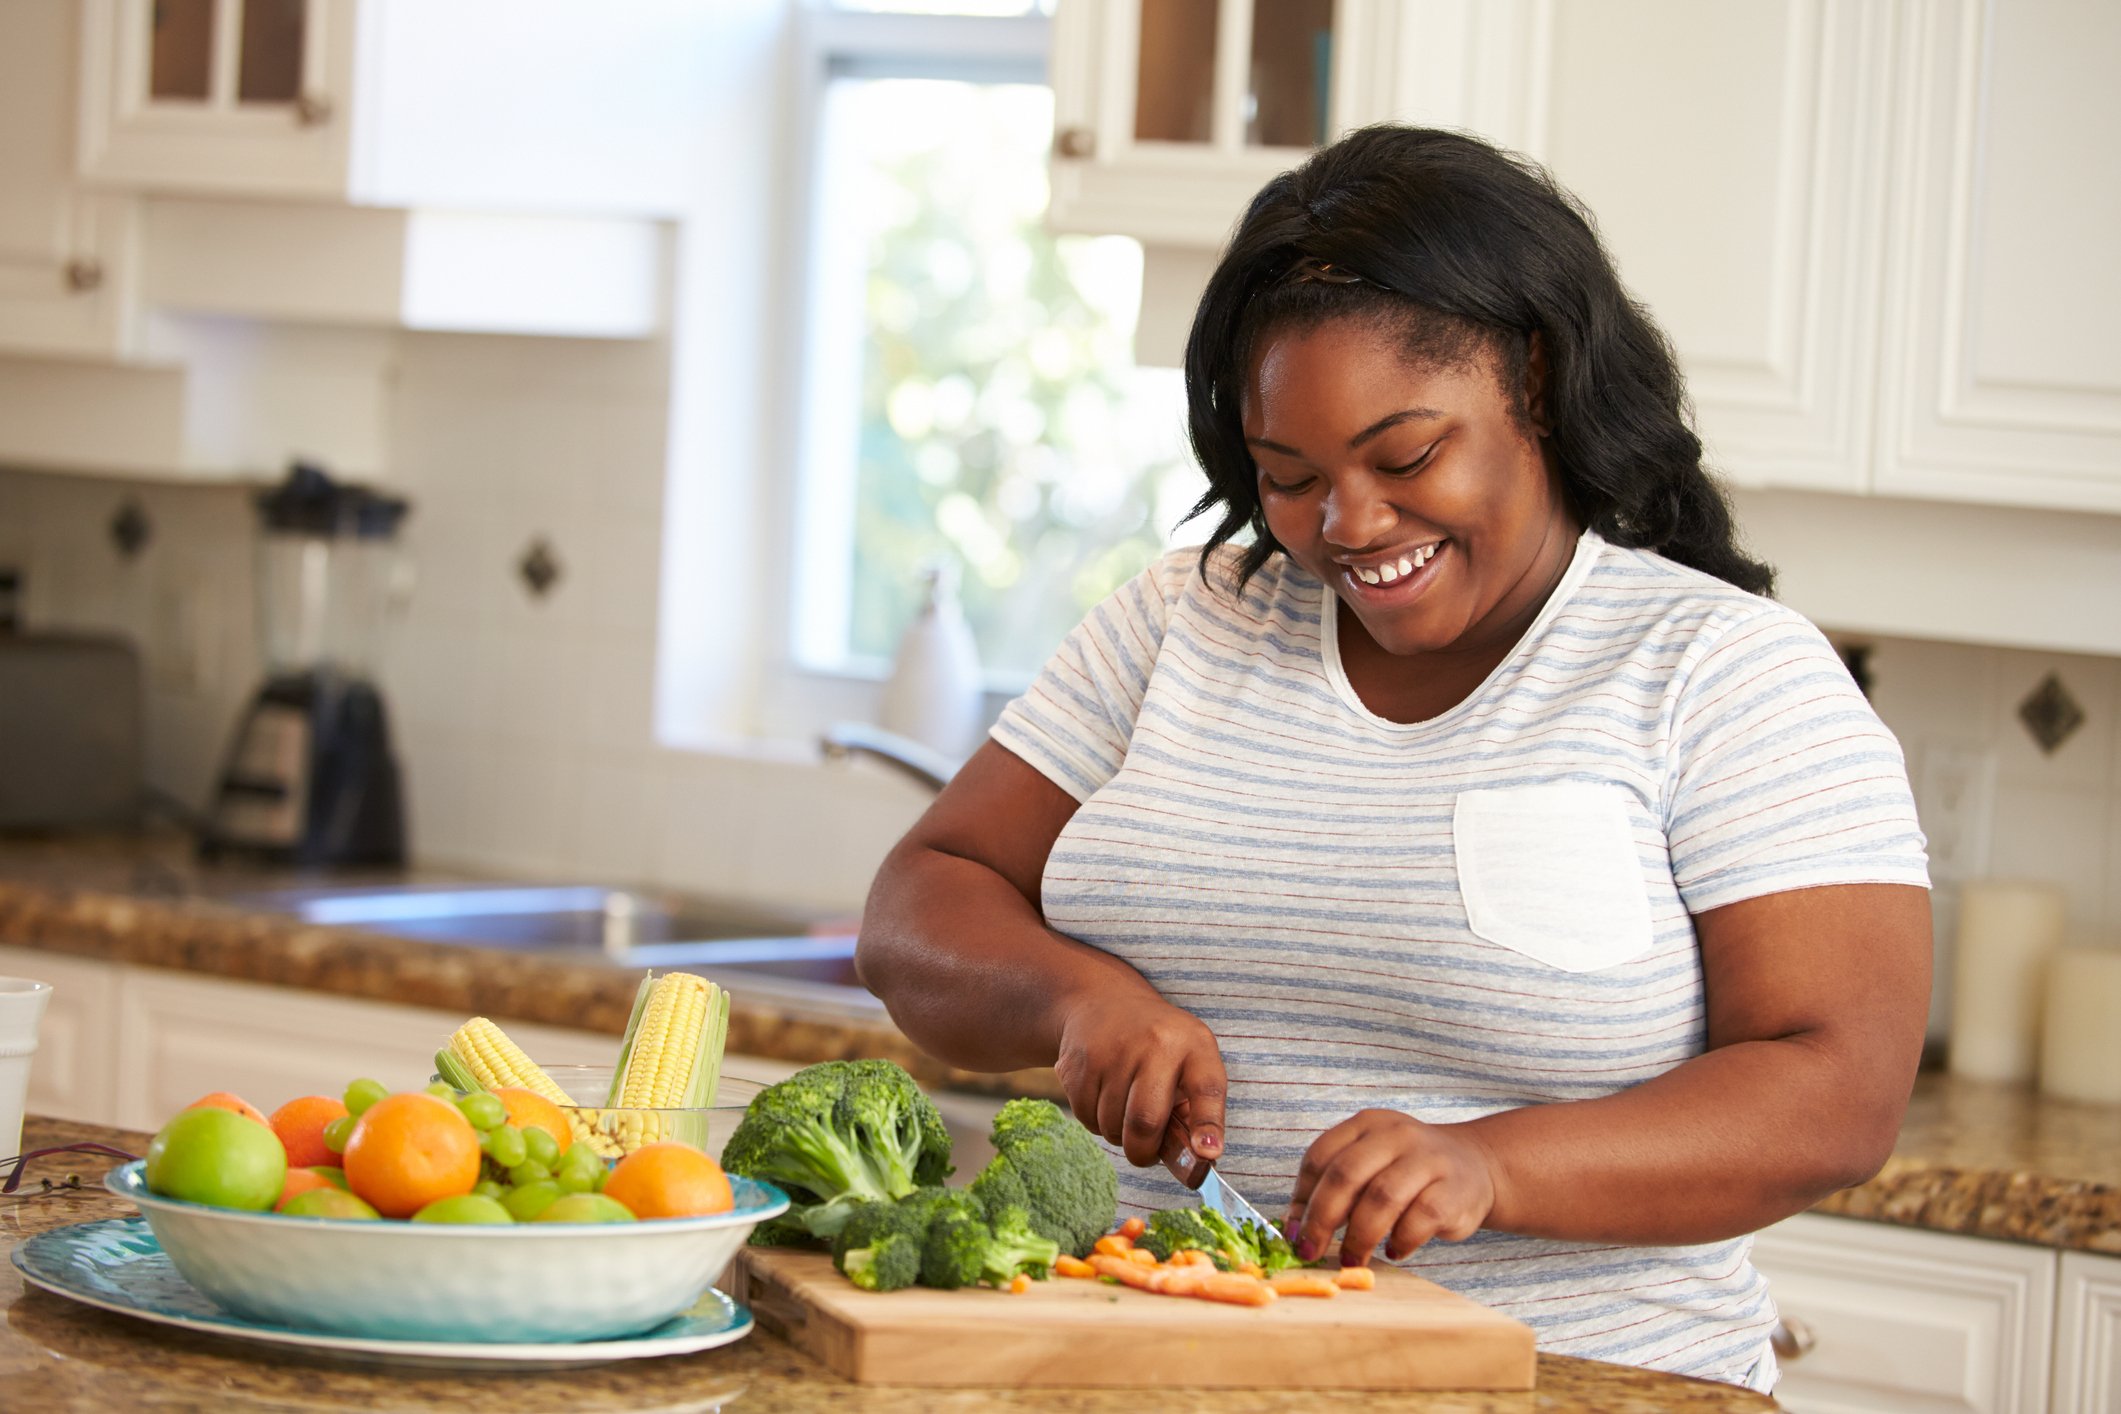 Woman Preparing Vegetables in Kitchen On Her Own Smiling